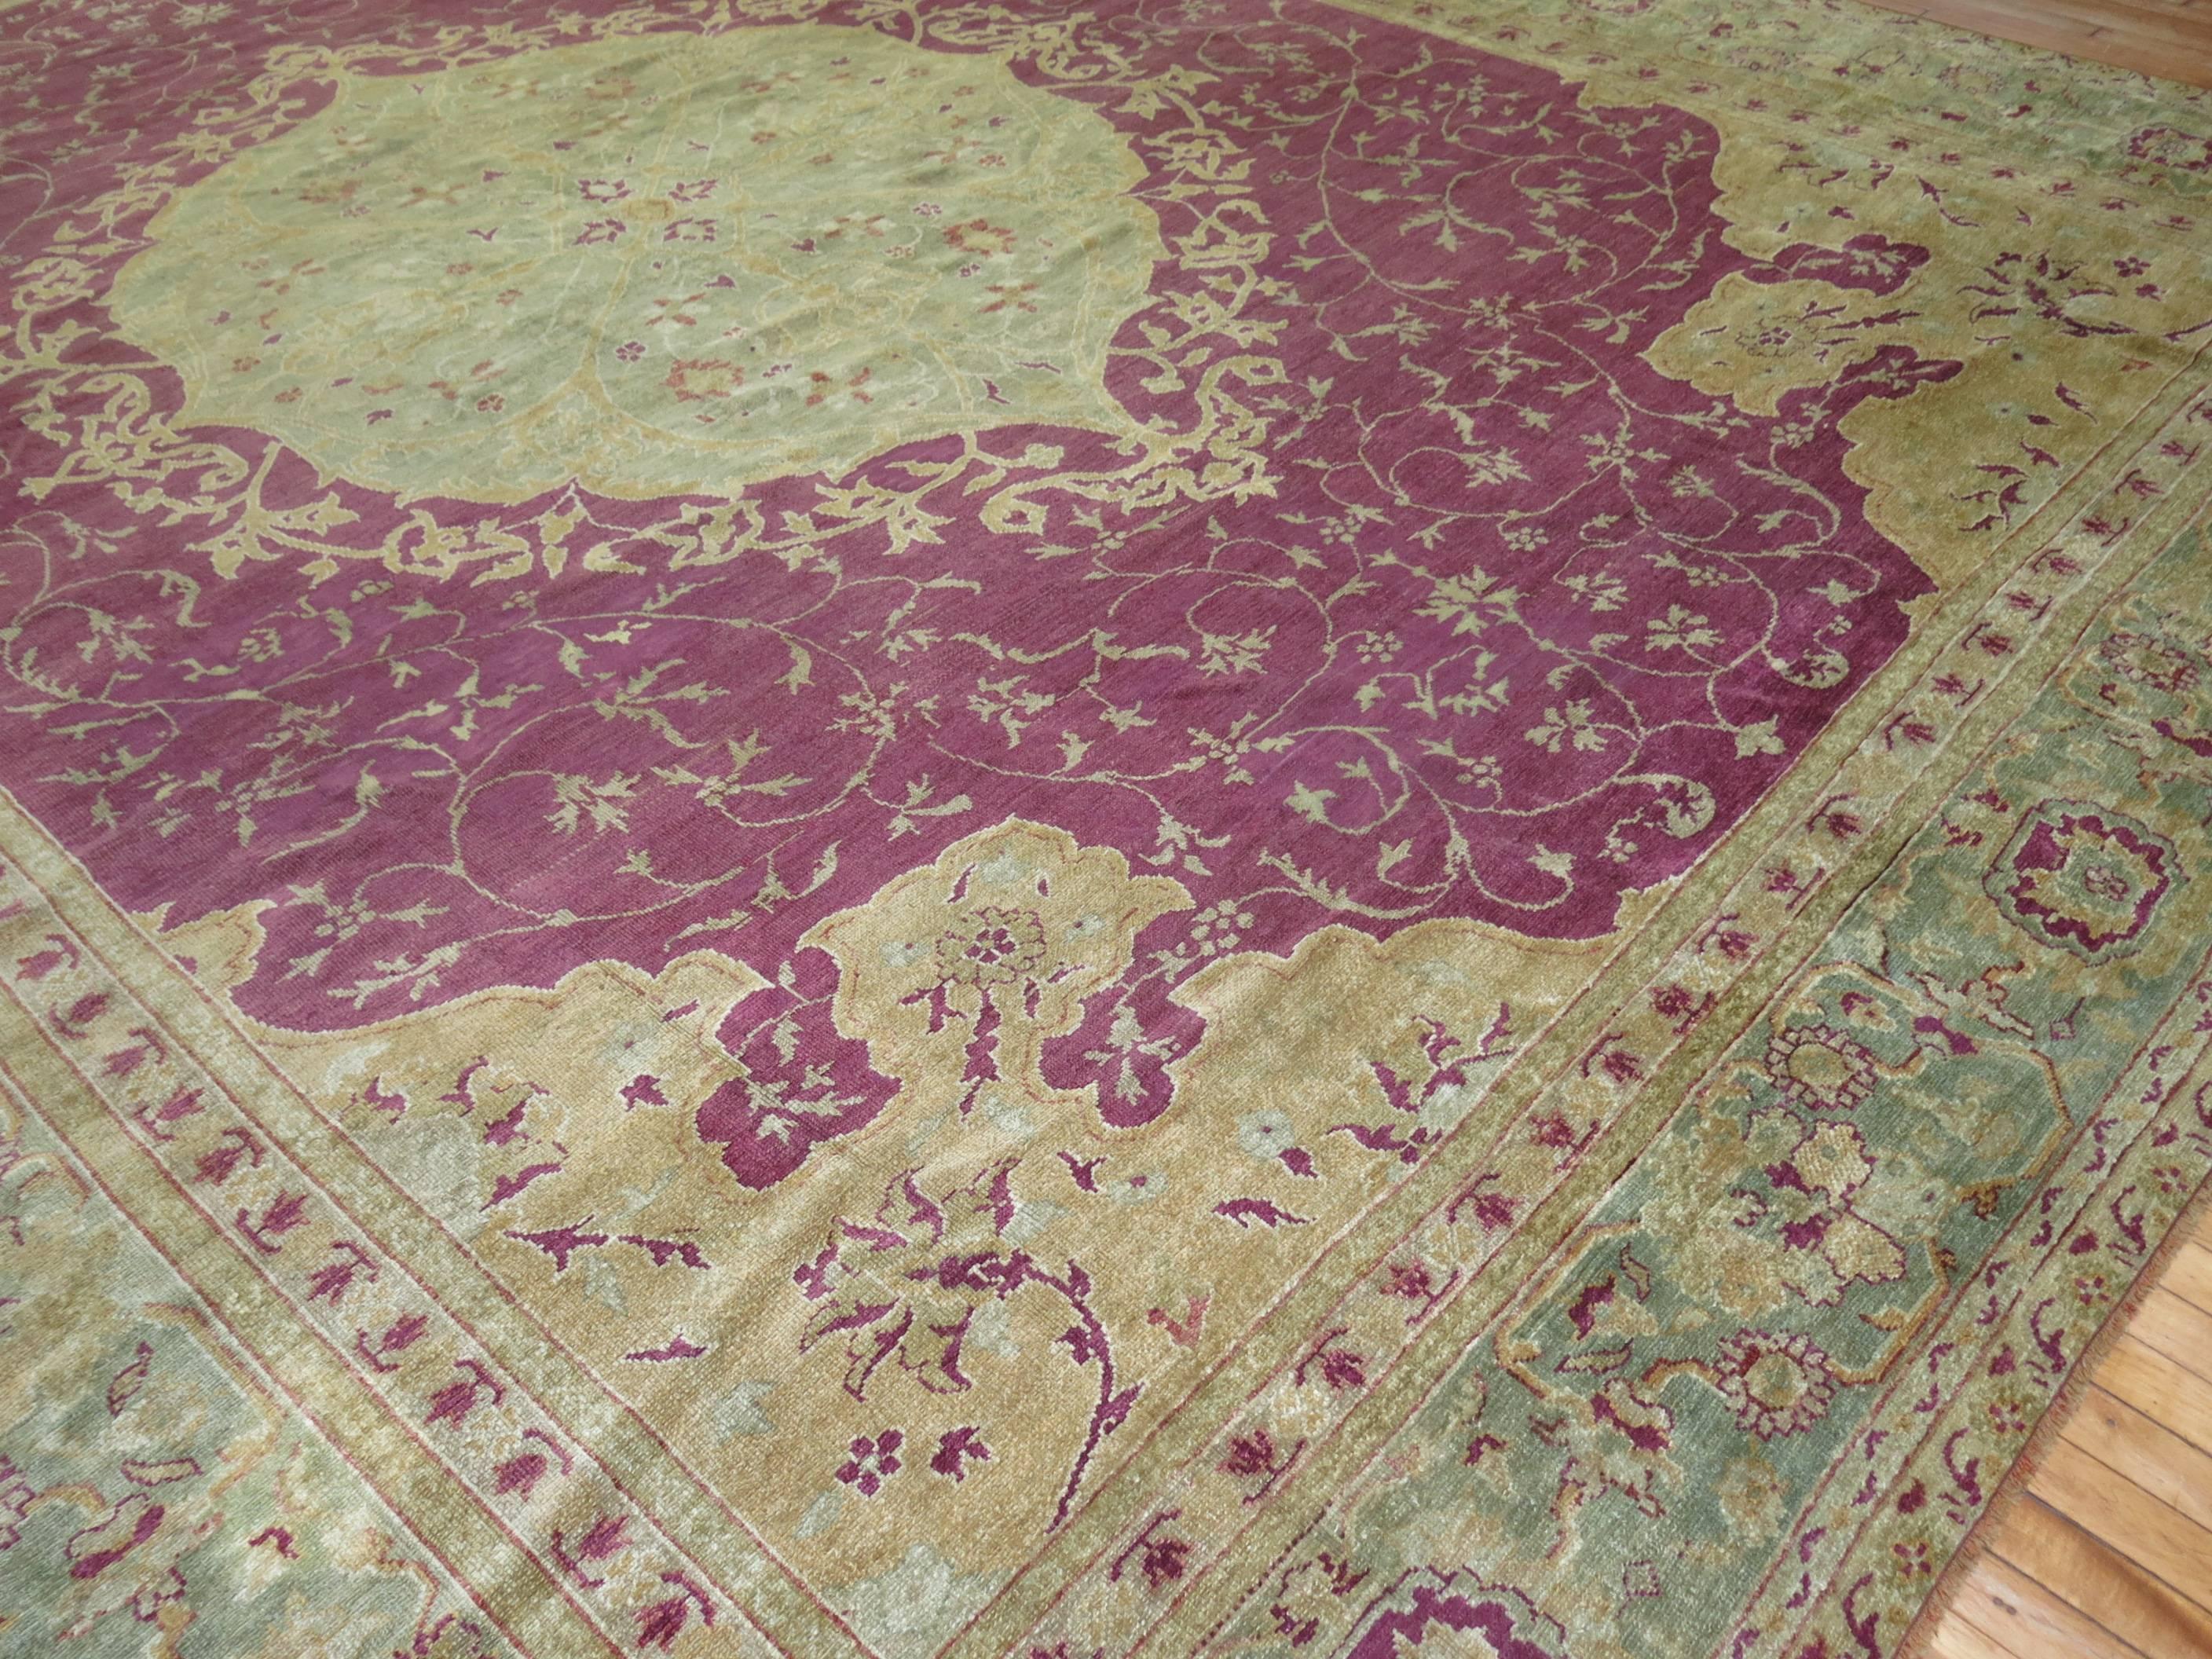 Plum Color Early 20th Century Antique Turkish Ghiordes Rug In Excellent Condition For Sale In New York, NY